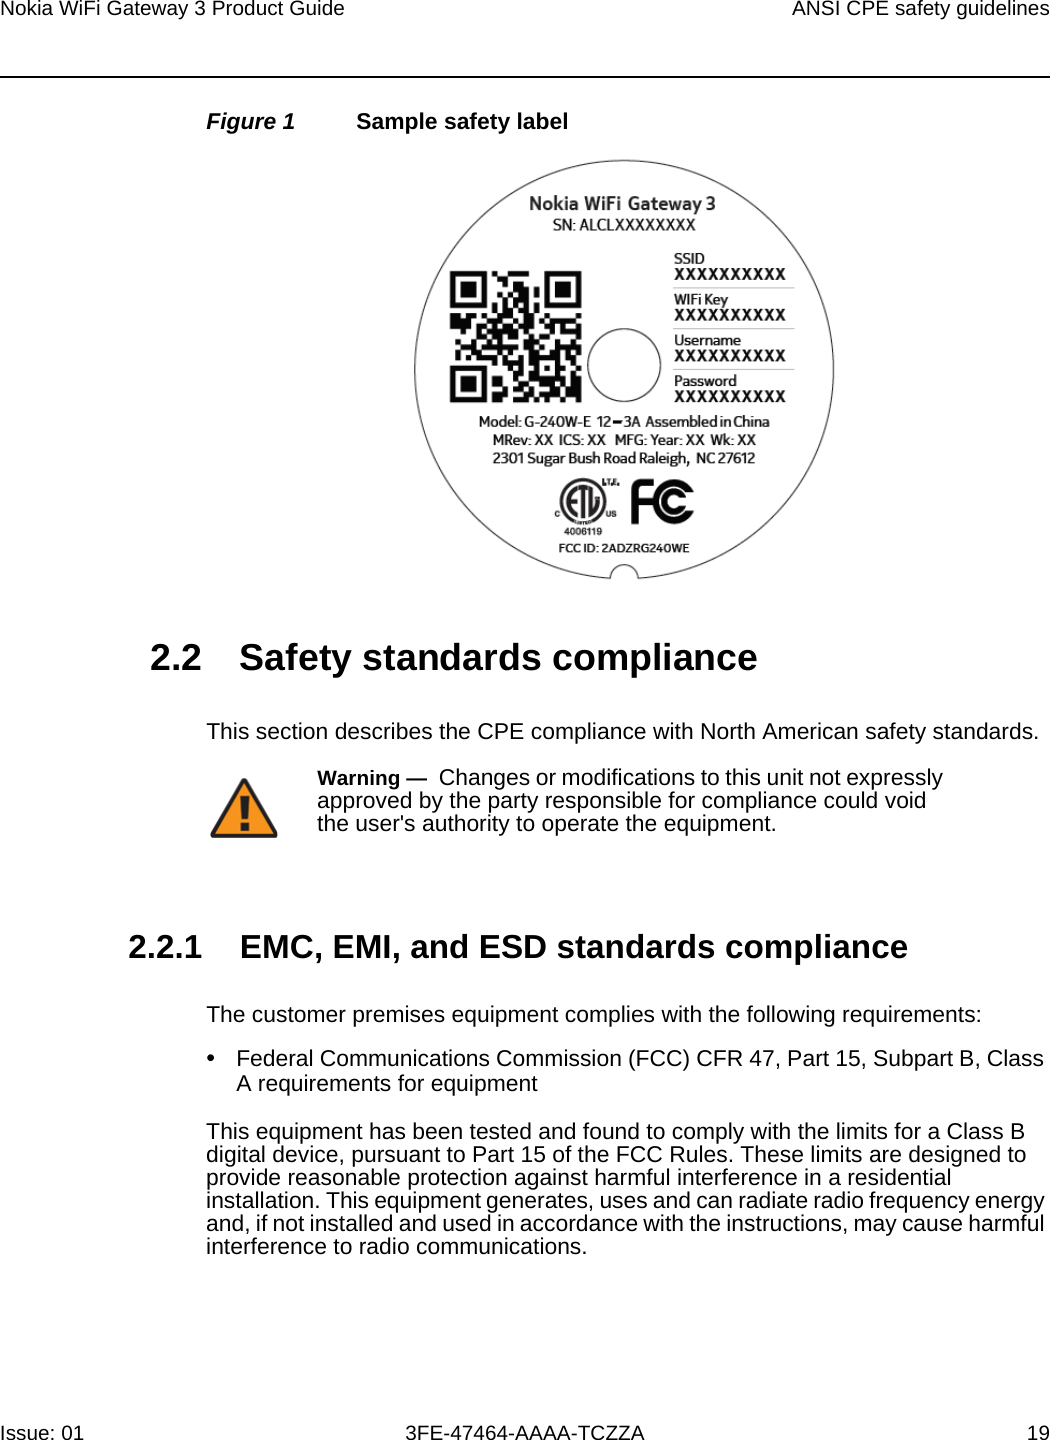 Nokia WiFi Gateway 3 Product Guide ANSI CPE safety guidelinesIssue: 01 3FE-47464-AAAA-TCZZA 19 Figure 1 Sample safety label2.2 Safety standards complianceThis section describes the CPE compliance with North American safety standards.2.2.1 EMC, EMI, and ESD standards complianceThe customer premises equipment complies with the following requirements:•Federal Communications Commission (FCC) CFR 47, Part 15, Subpart B, Class A requirements for equipmentThis equipment has been tested and found to comply with the limits for a Class B digital device, pursuant to Part 15 of the FCC Rules. These limits are designed to provide reasonable protection against harmful interference in a residential installation. This equipment generates, uses and can radiate radio frequency energy and, if not installed and used in accordance with the instructions, may cause harmful interference to radio communications.Warning —  Changes or modifications to this unit not expressly approved by the party responsible for compliance could void the user&apos;s authority to operate the equipment.